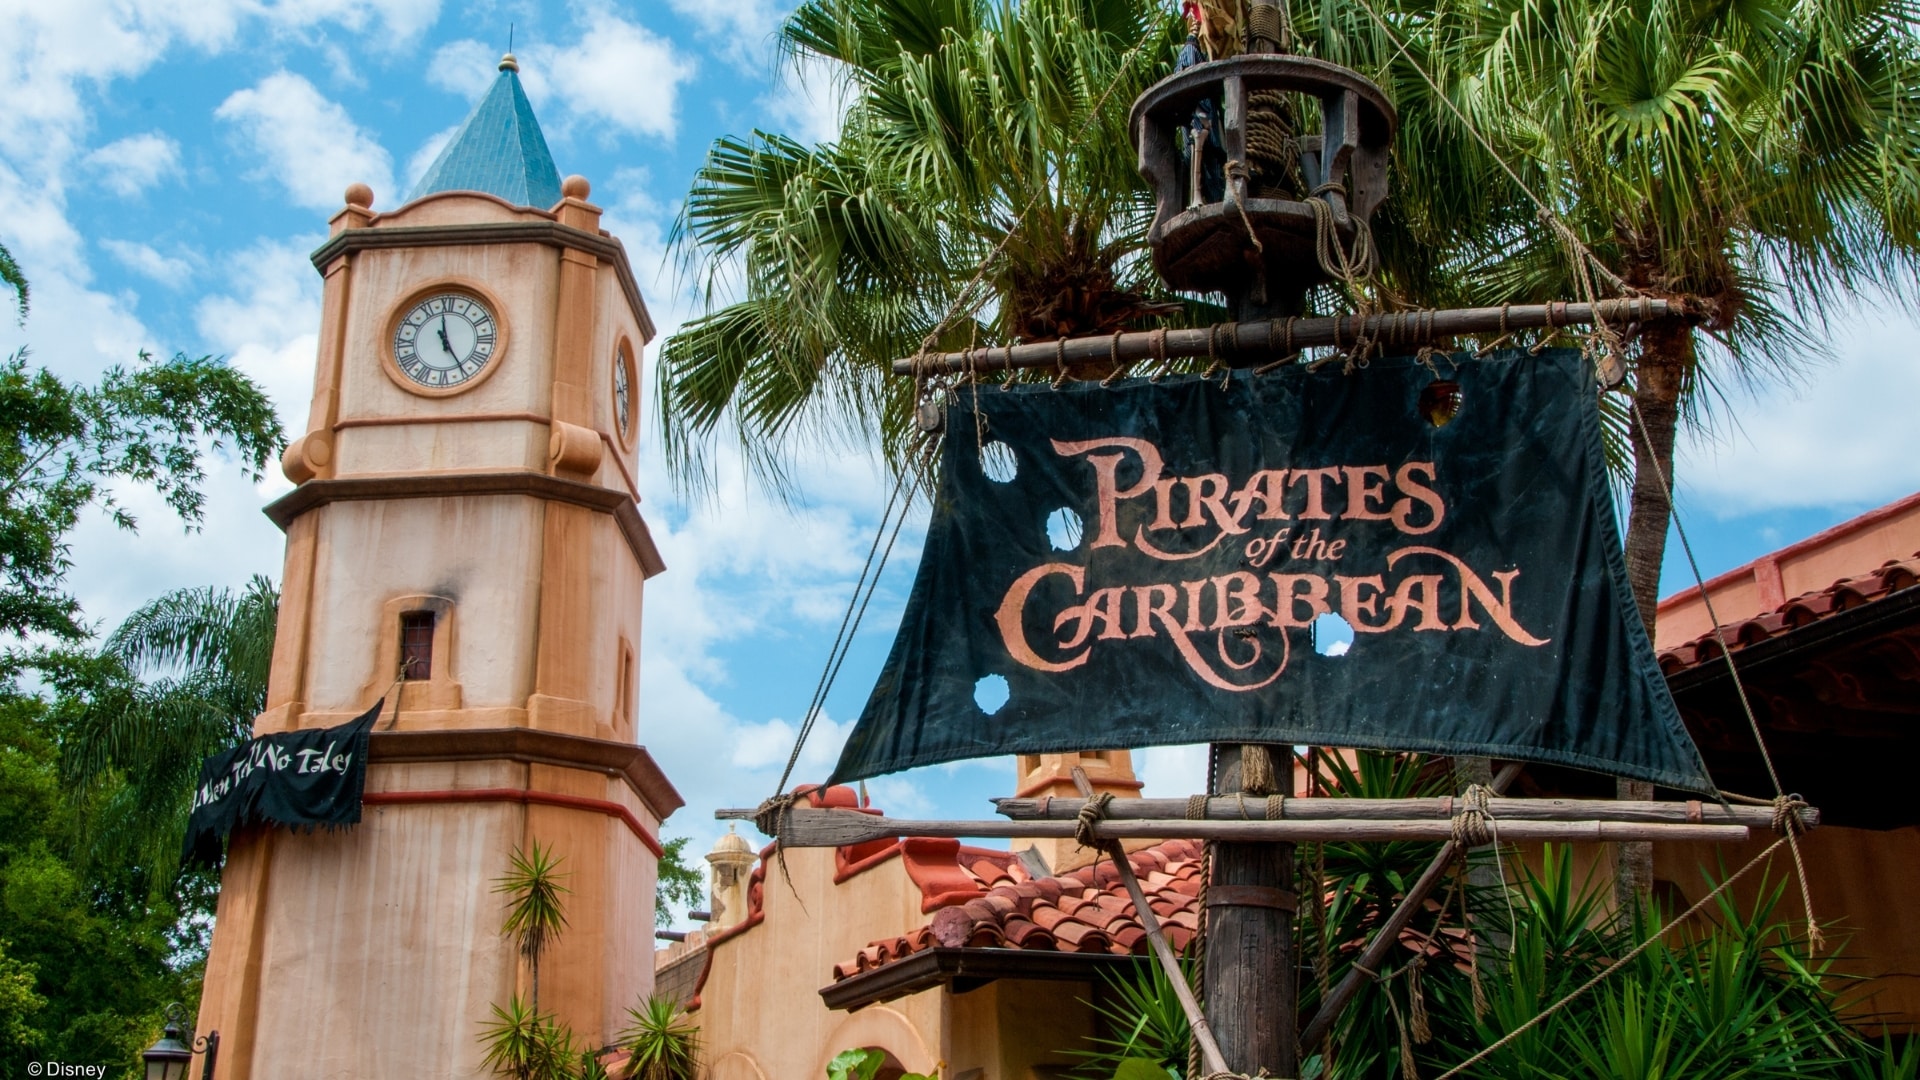 Things to Do at Magic Kingdom - Pirates of the Caribbean Ride